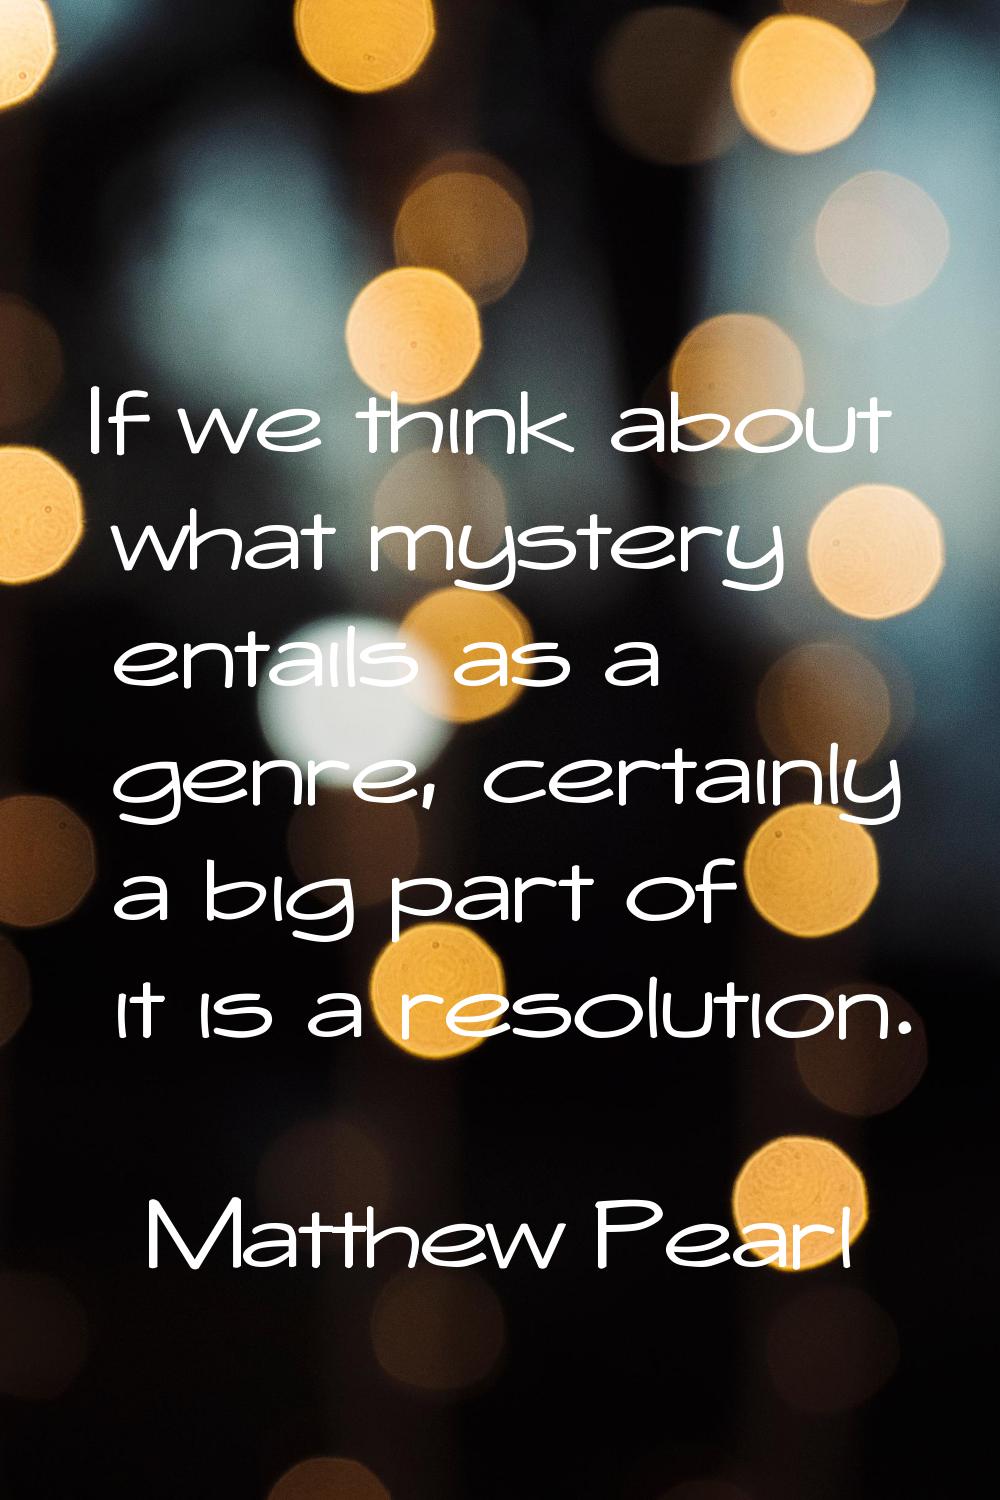 If we think about what mystery entails as a genre, certainly a big part of it is a resolution.